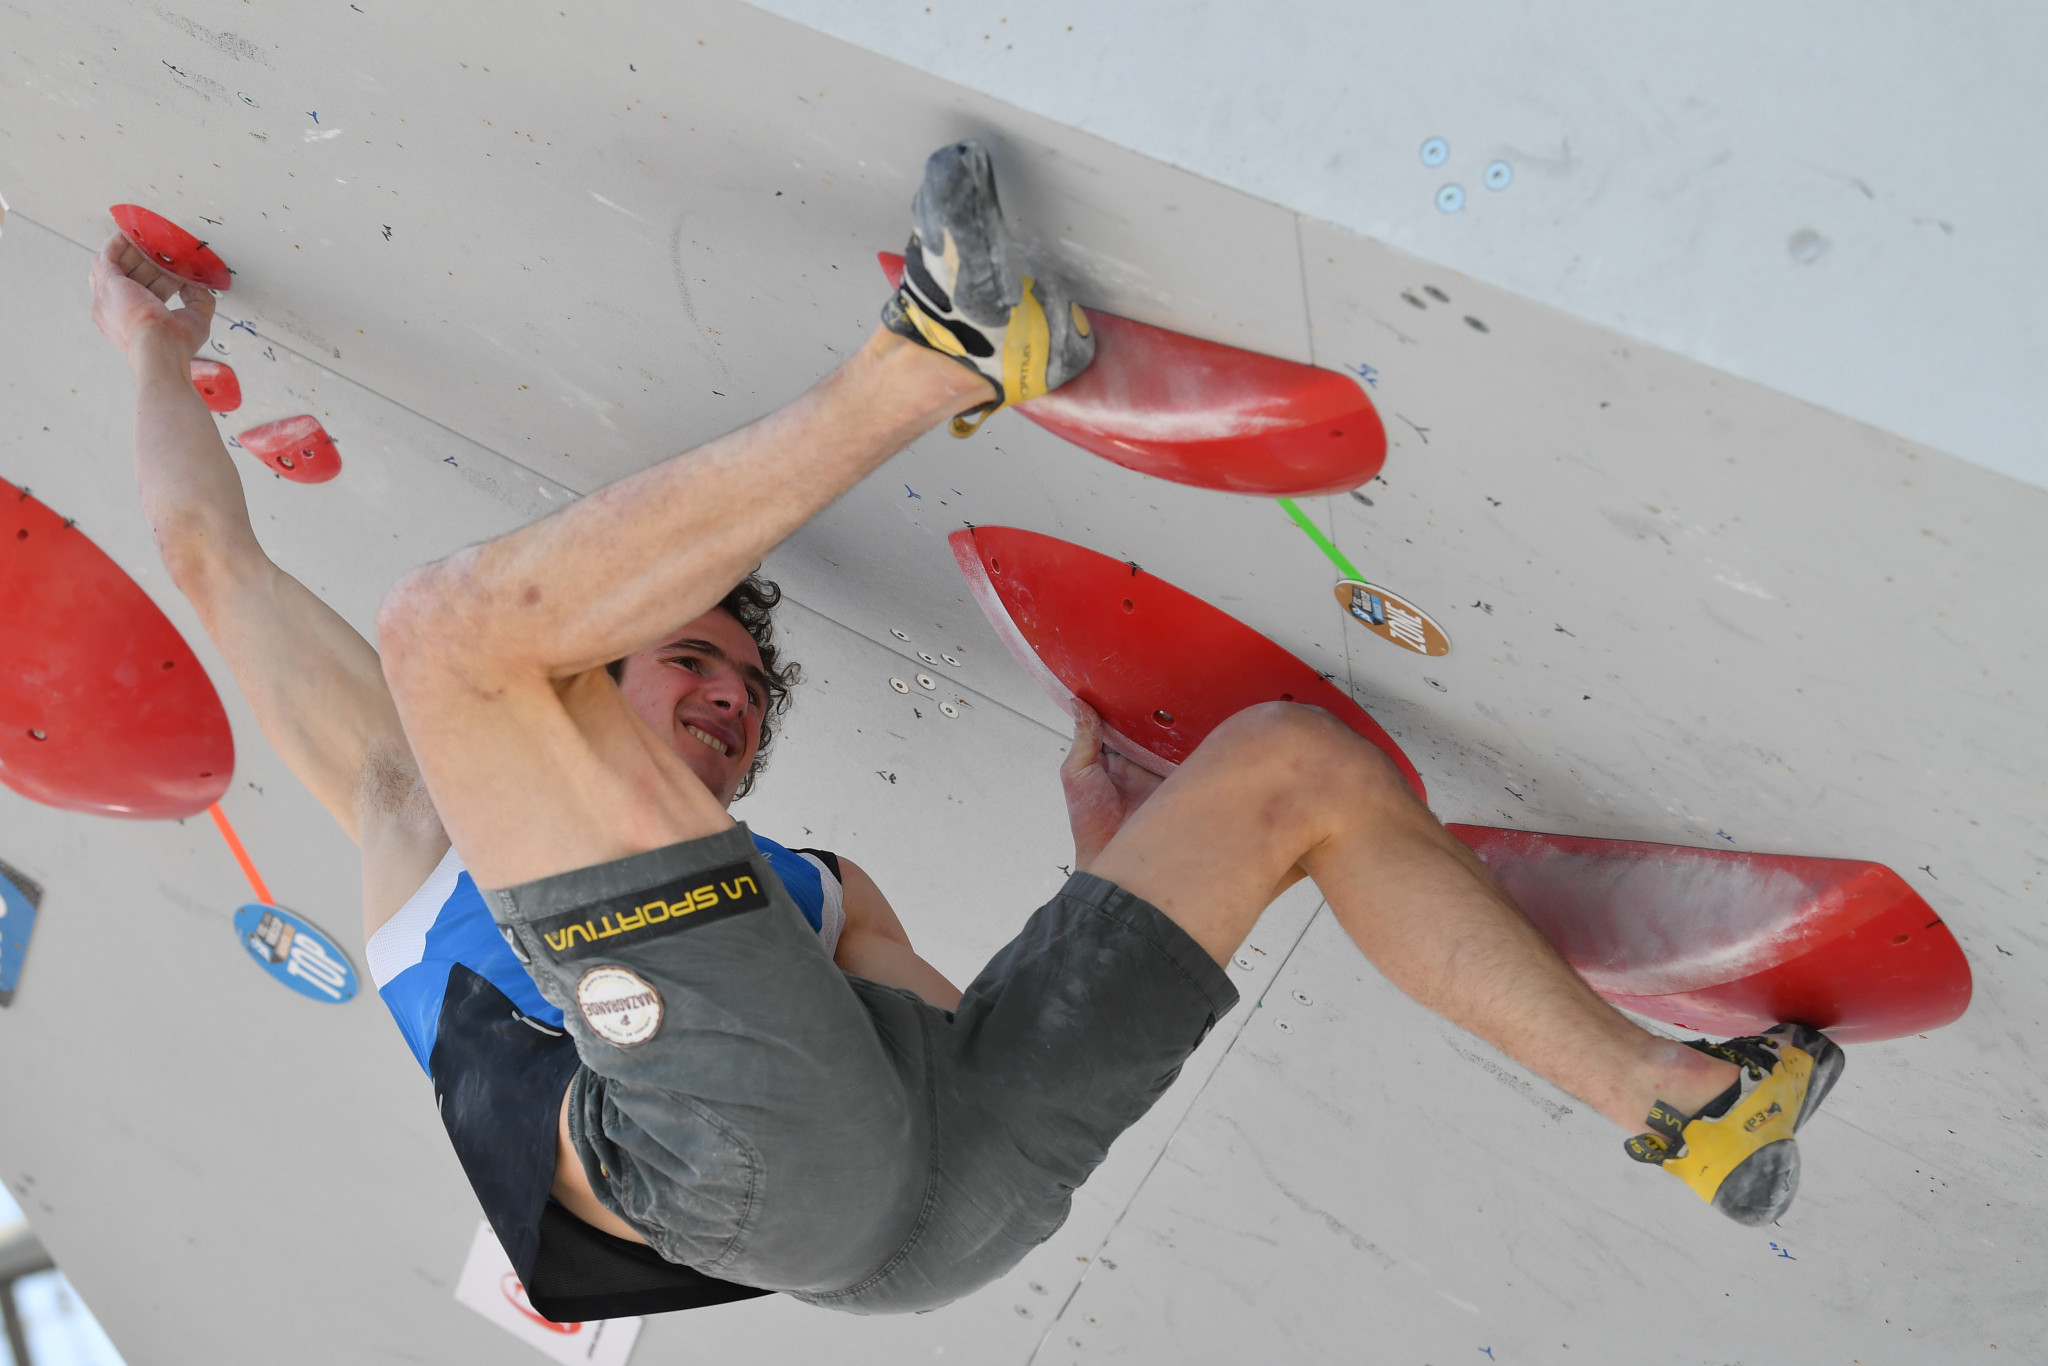 Adam Ondra was the stand-out performer today in men's bouldering qualifying at the IFSC World Championships ©Getty Images